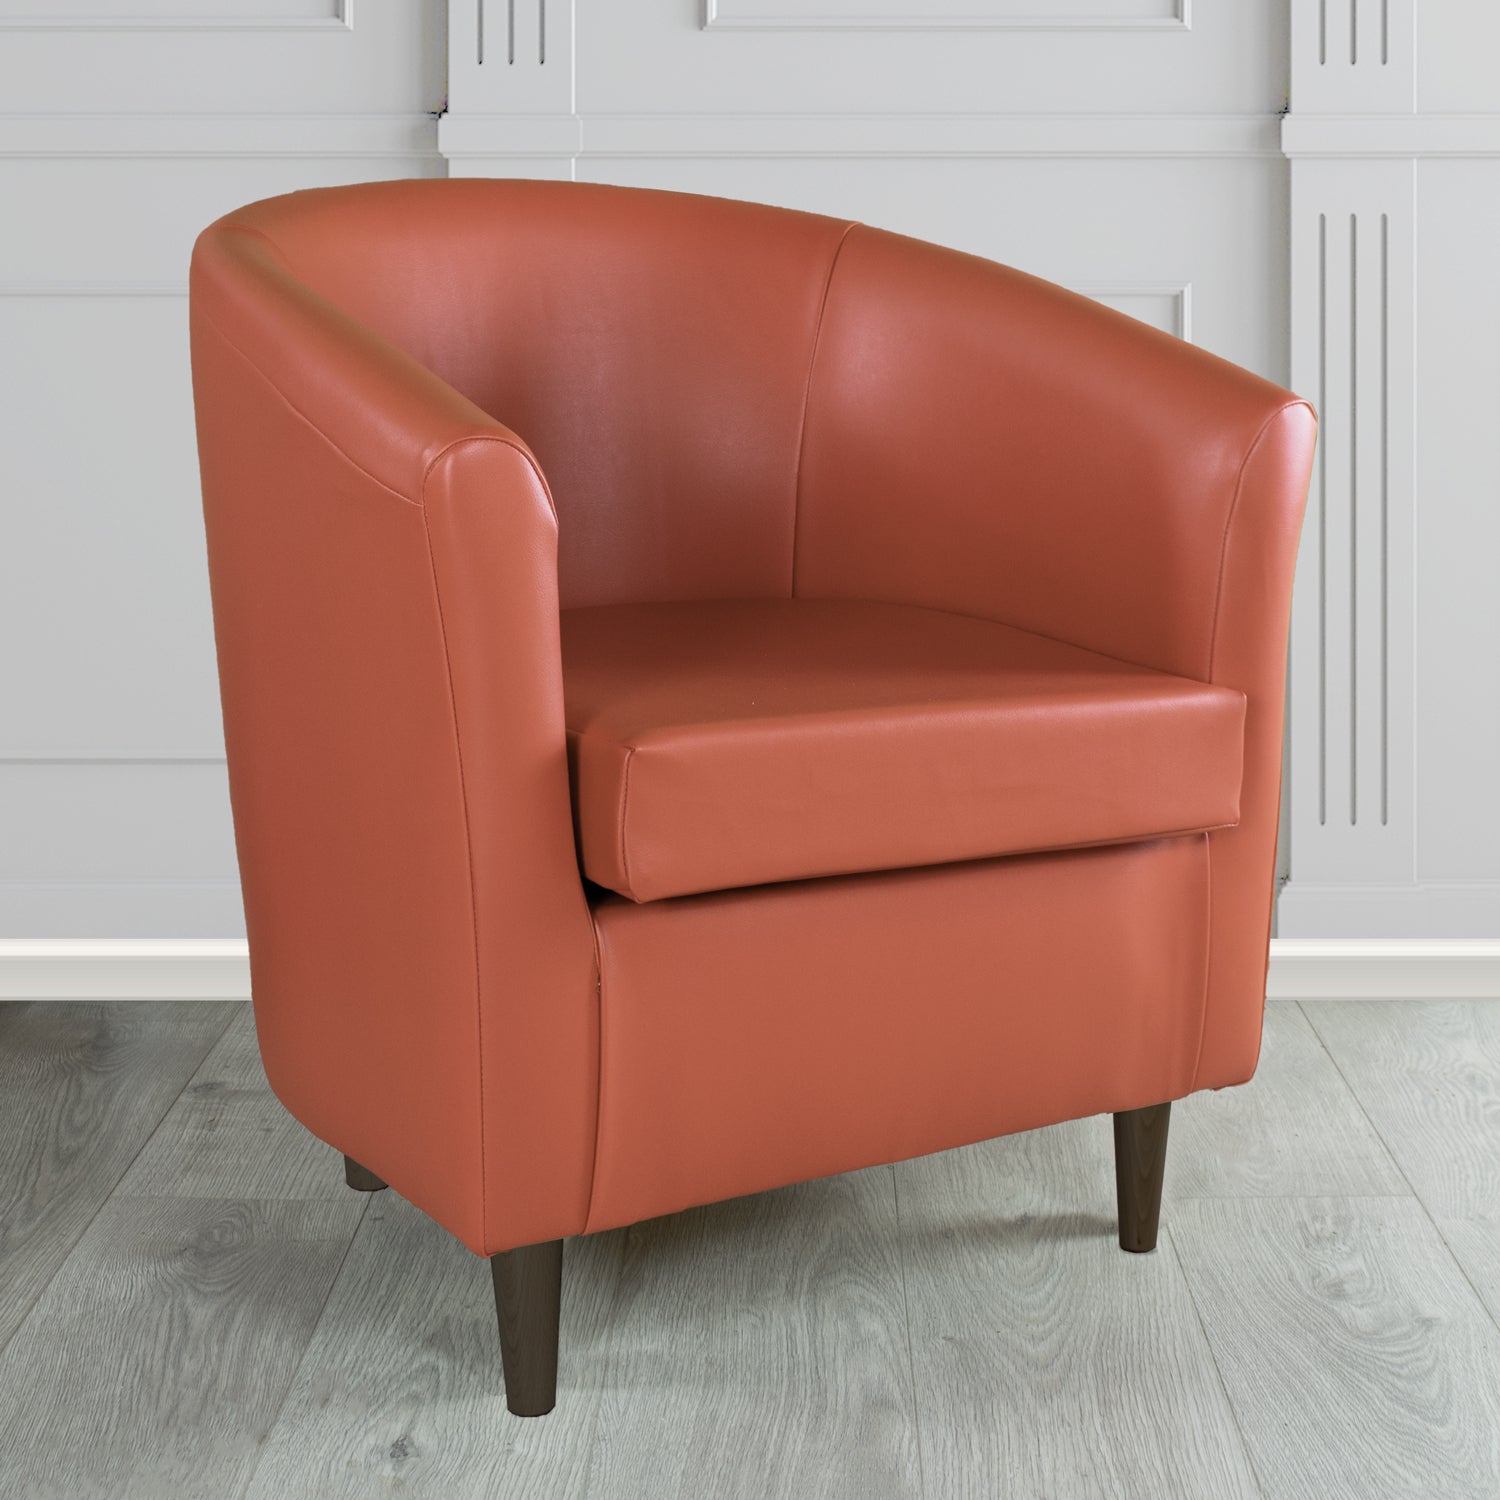 St Tropez Just Colour Rusty Crib 5 Faux Leather Tub Chair (4524595511338)